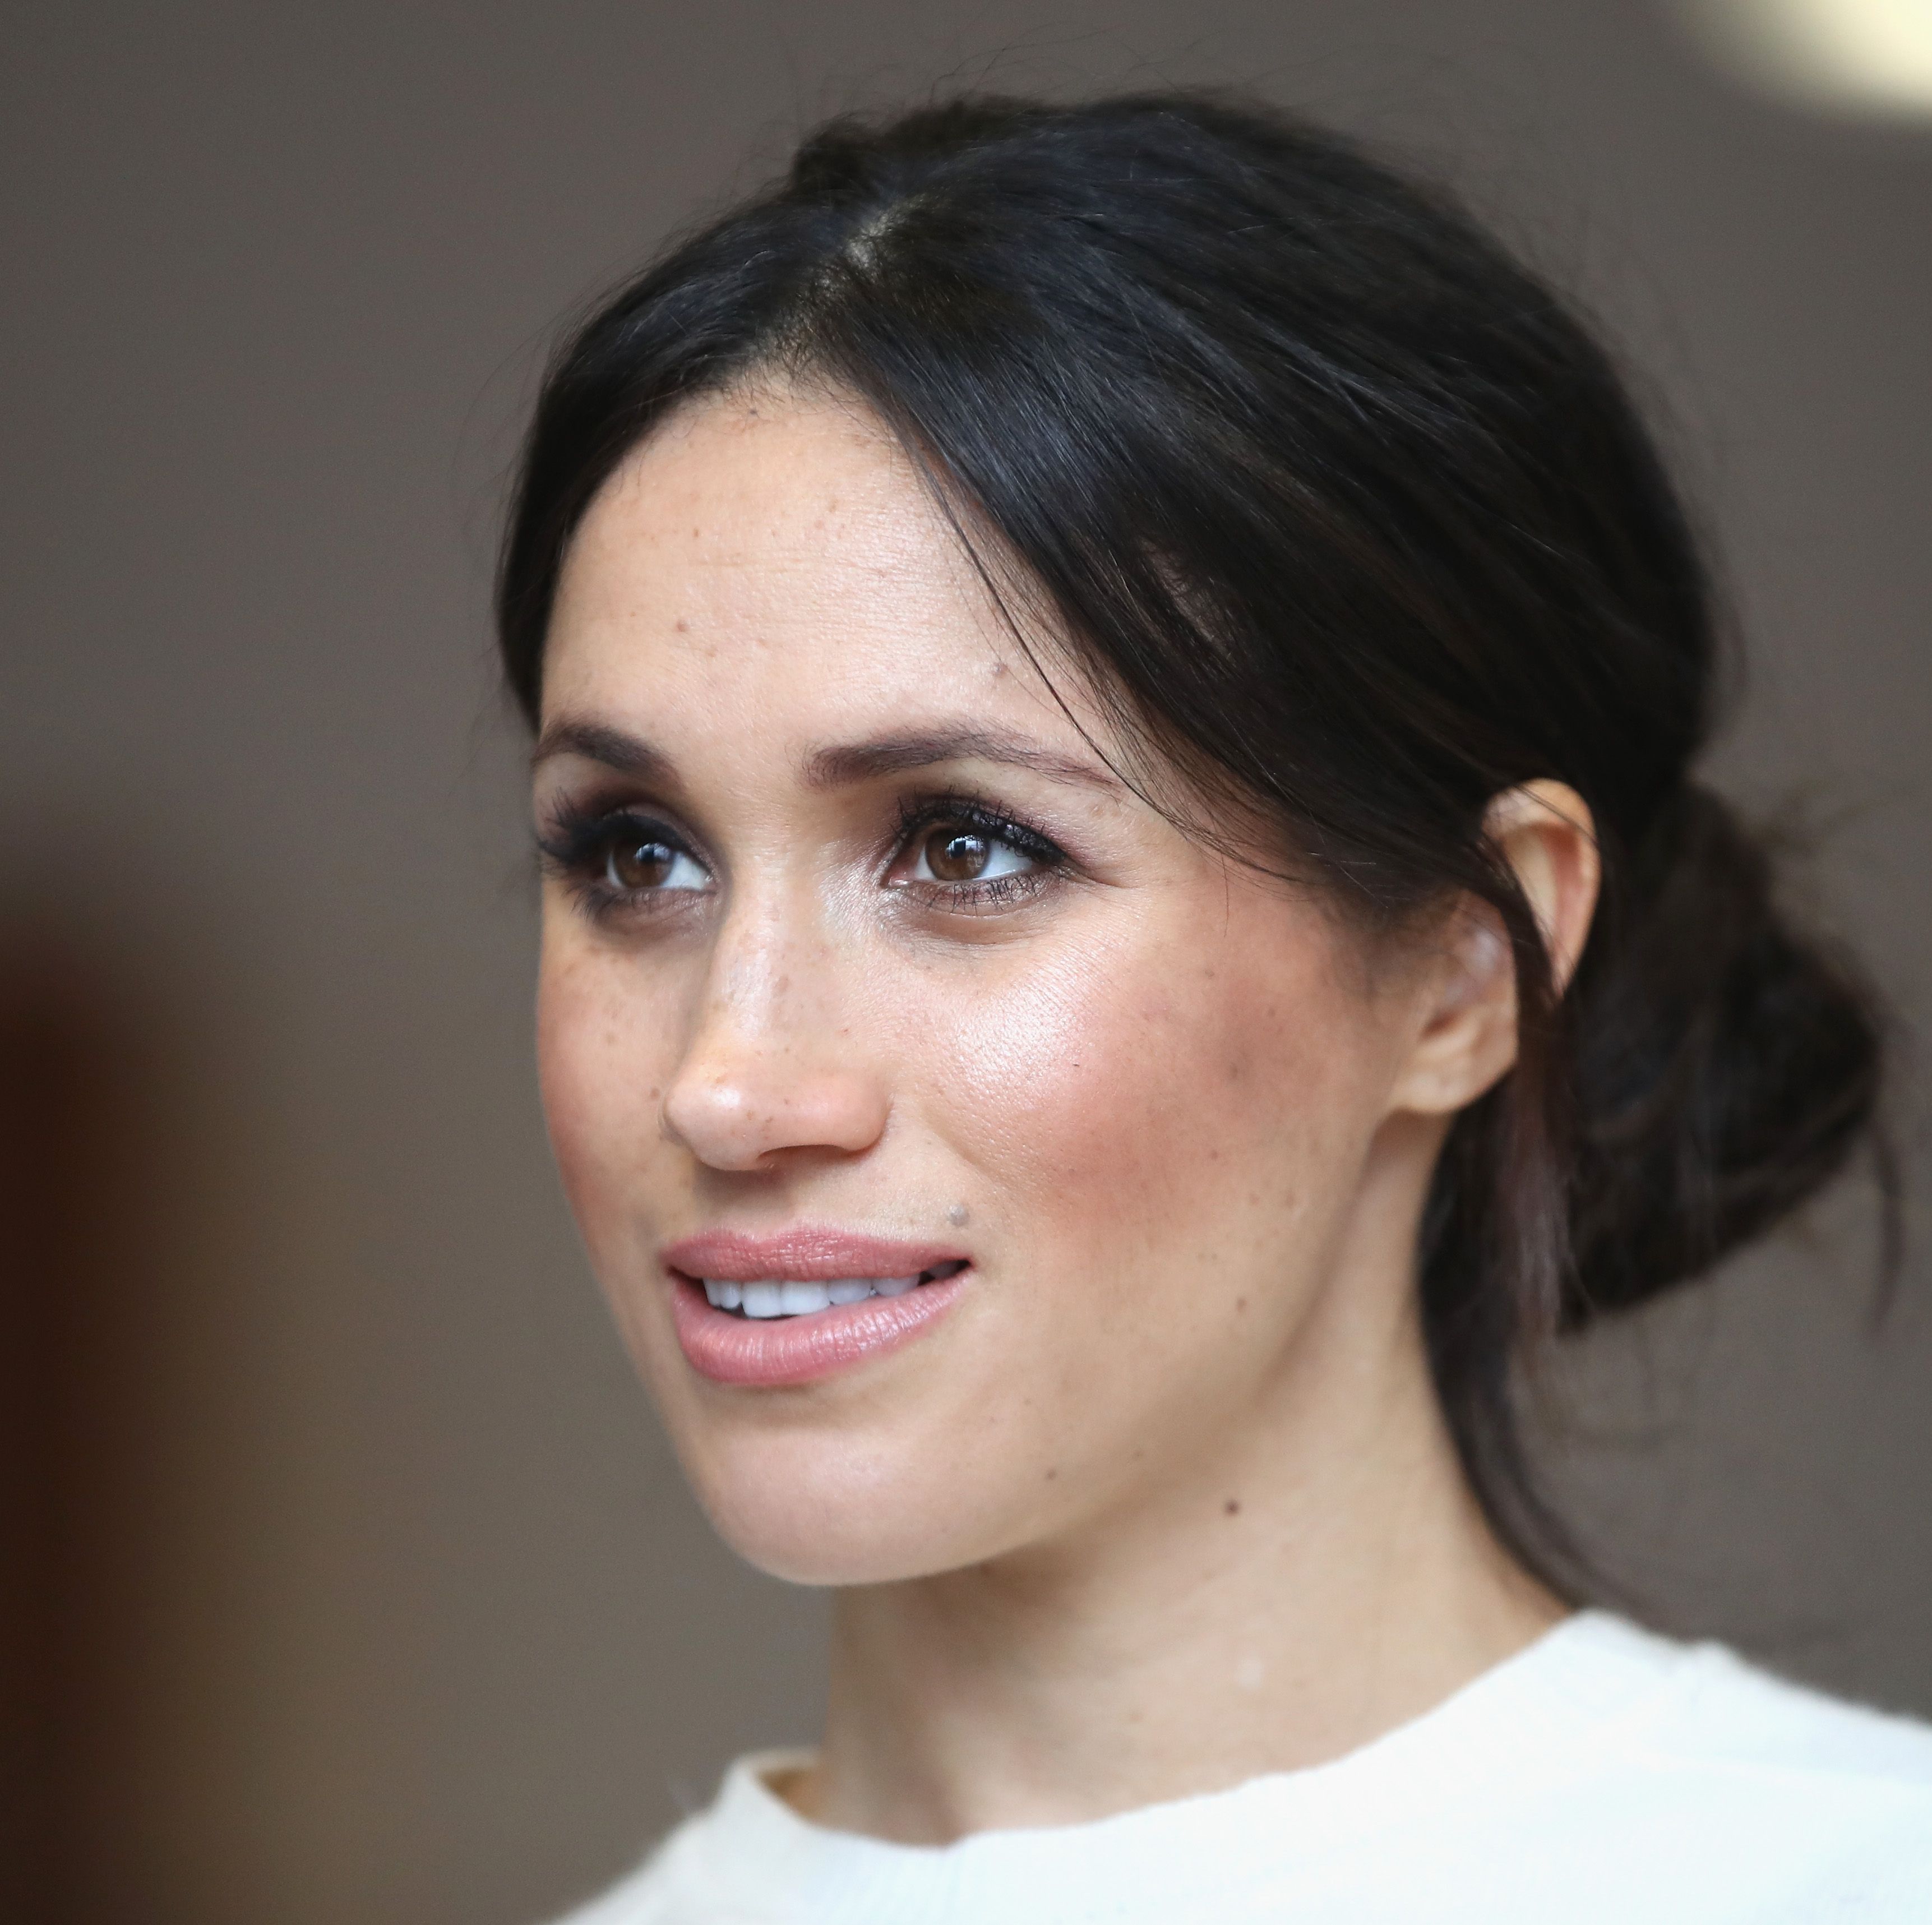 Meghan Markle Opens Up About the Queen's Passing and Supporting Prince Harry